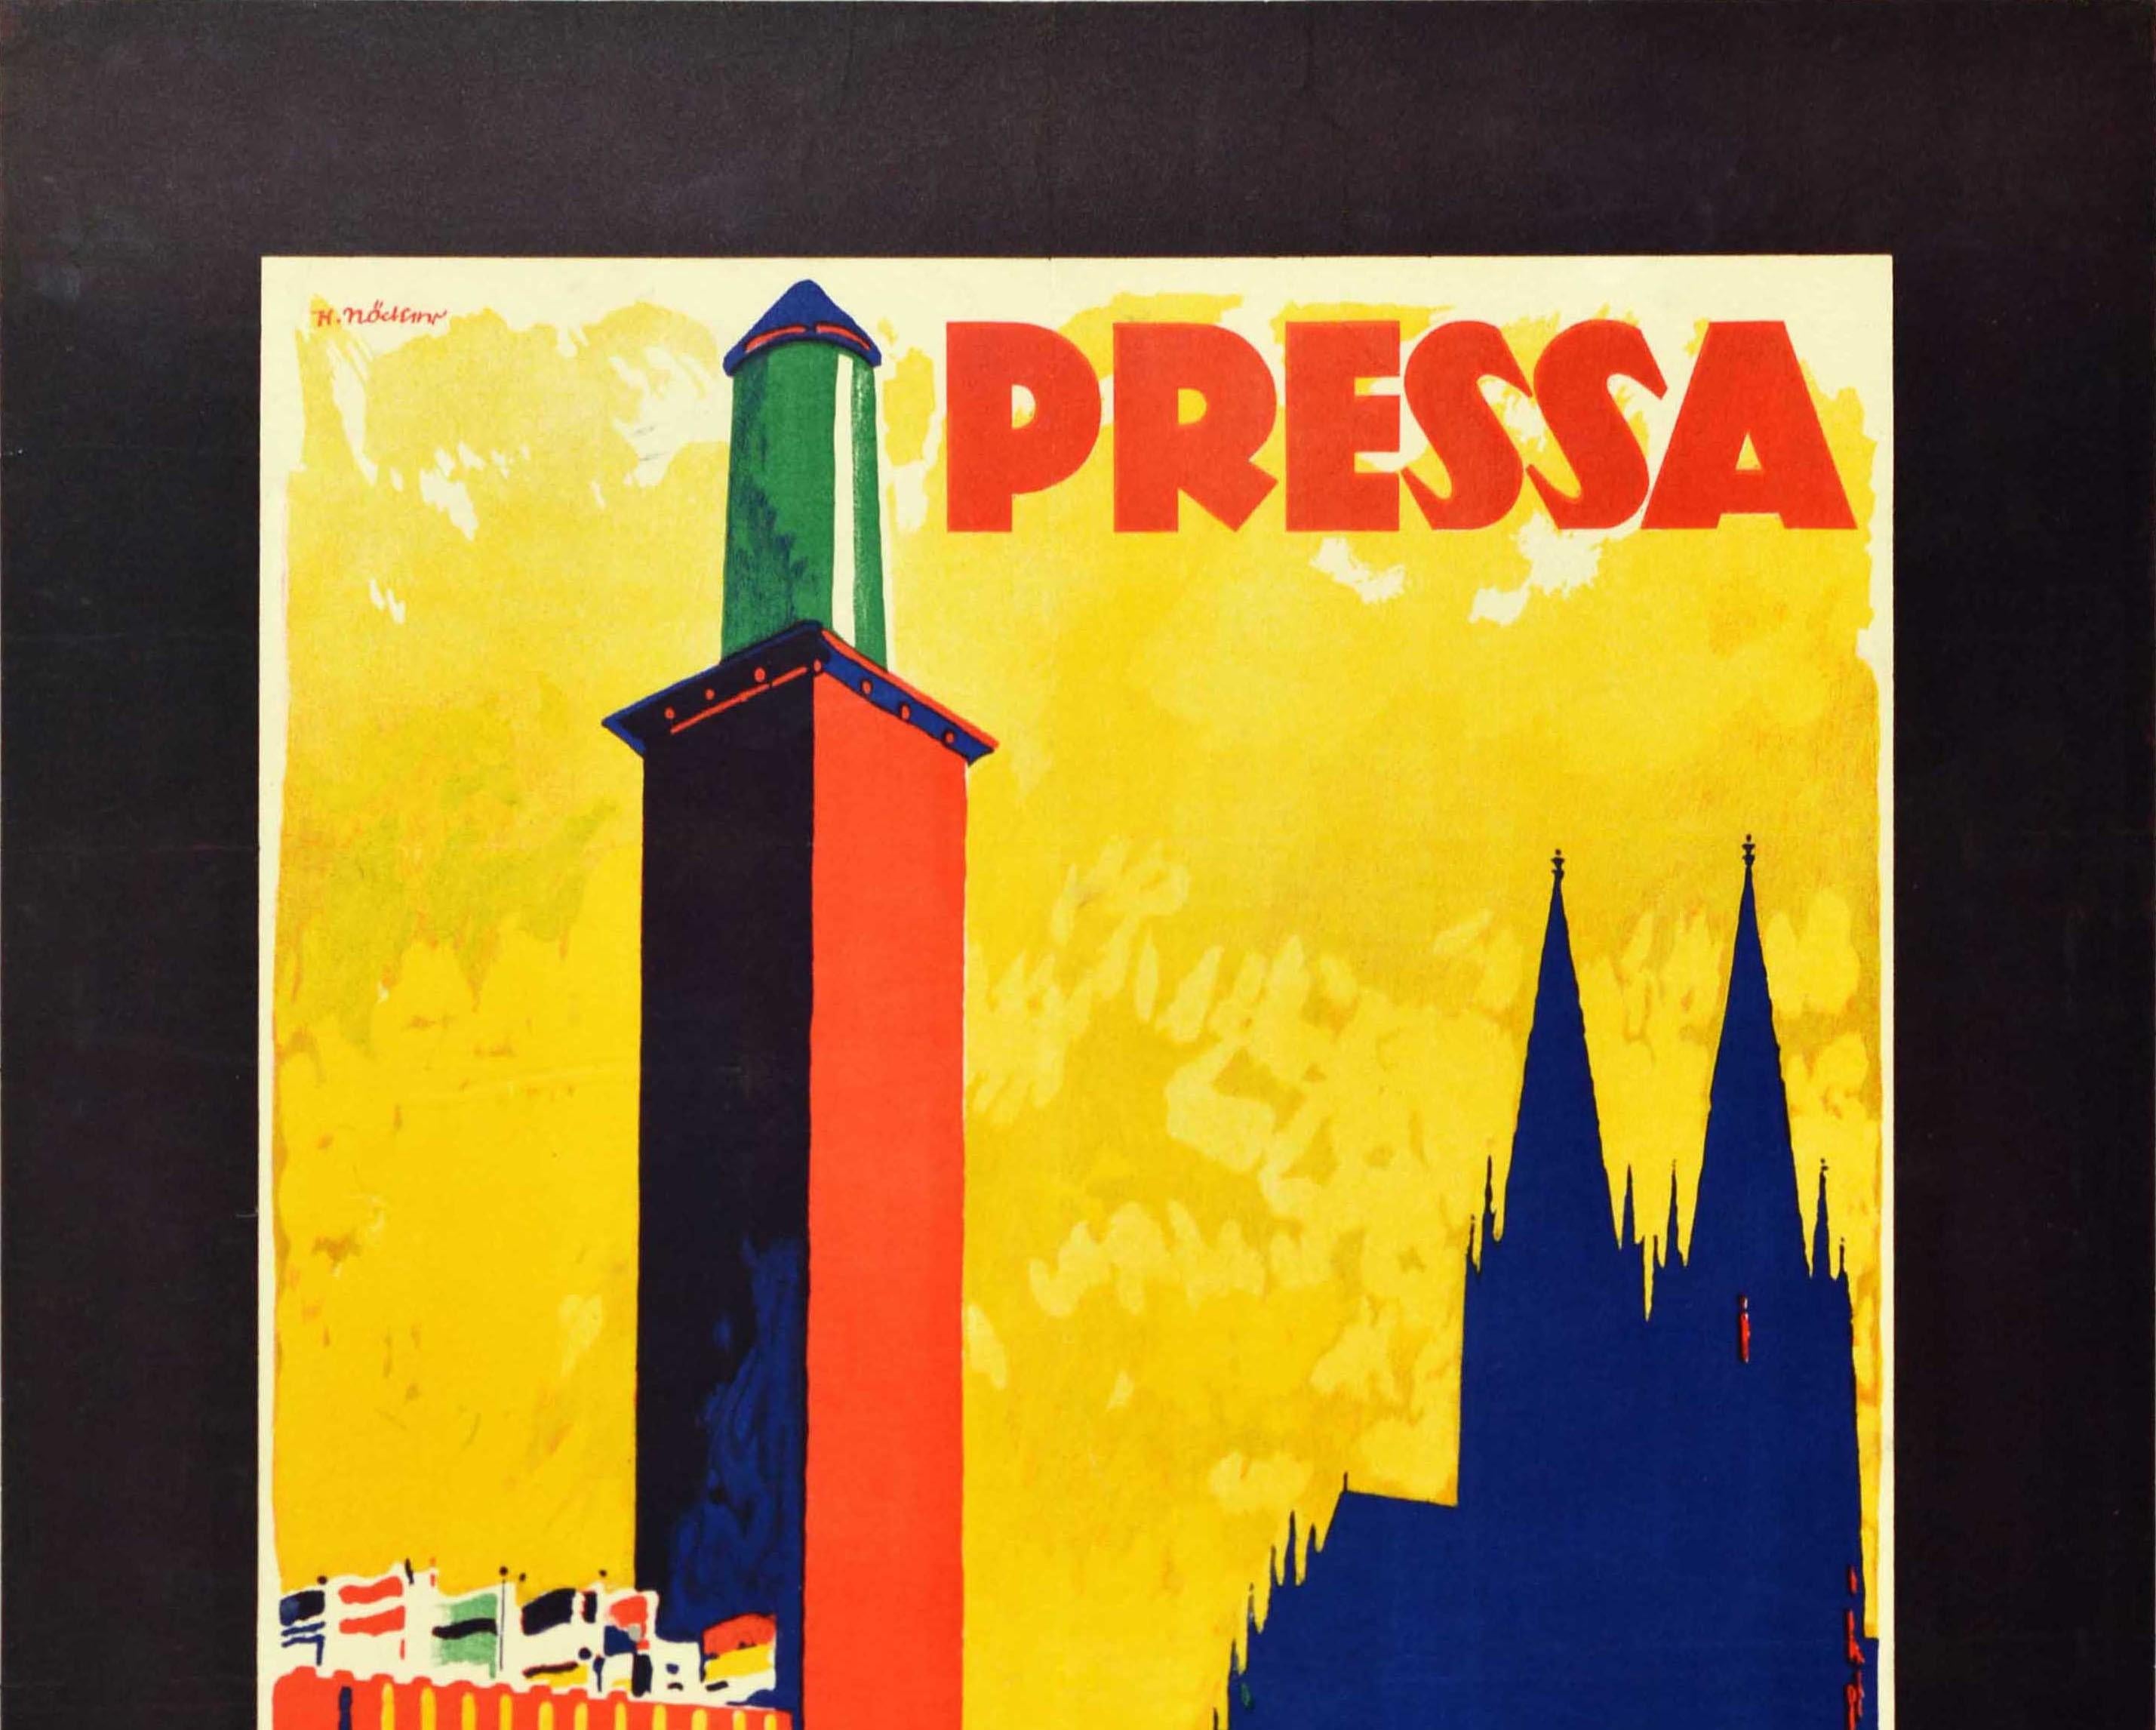 Original vintage advertising poster for Pressa The World Press Exhibition on the Rhine May-October Koln 1928 featuring a stunning design depicting queues of people going to the exhibition, a silhouette of the cathedral rising above the colourful